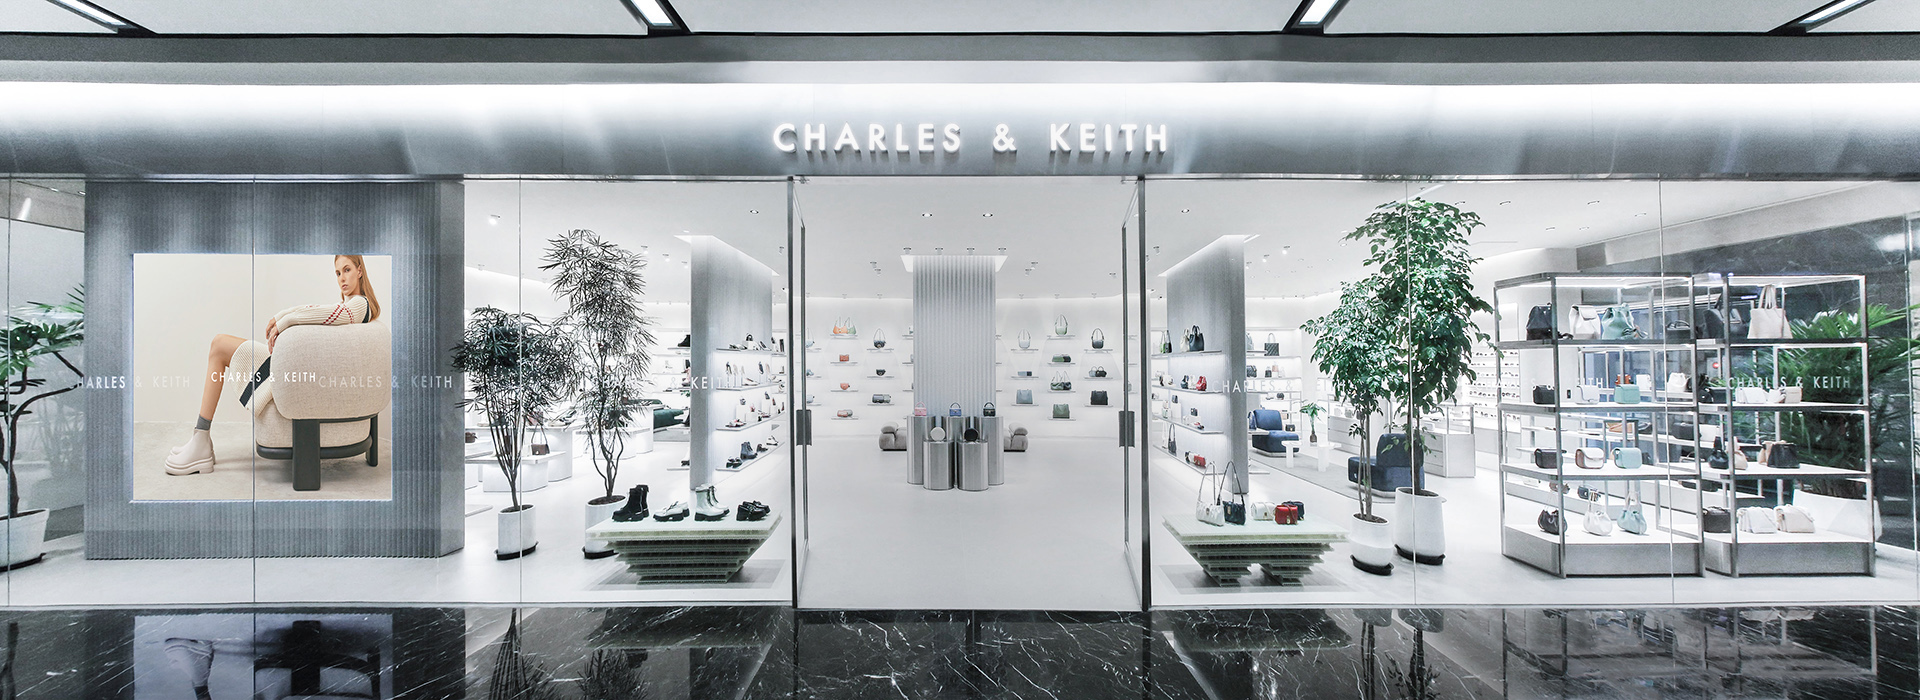 Charles & Keith Head Office Building